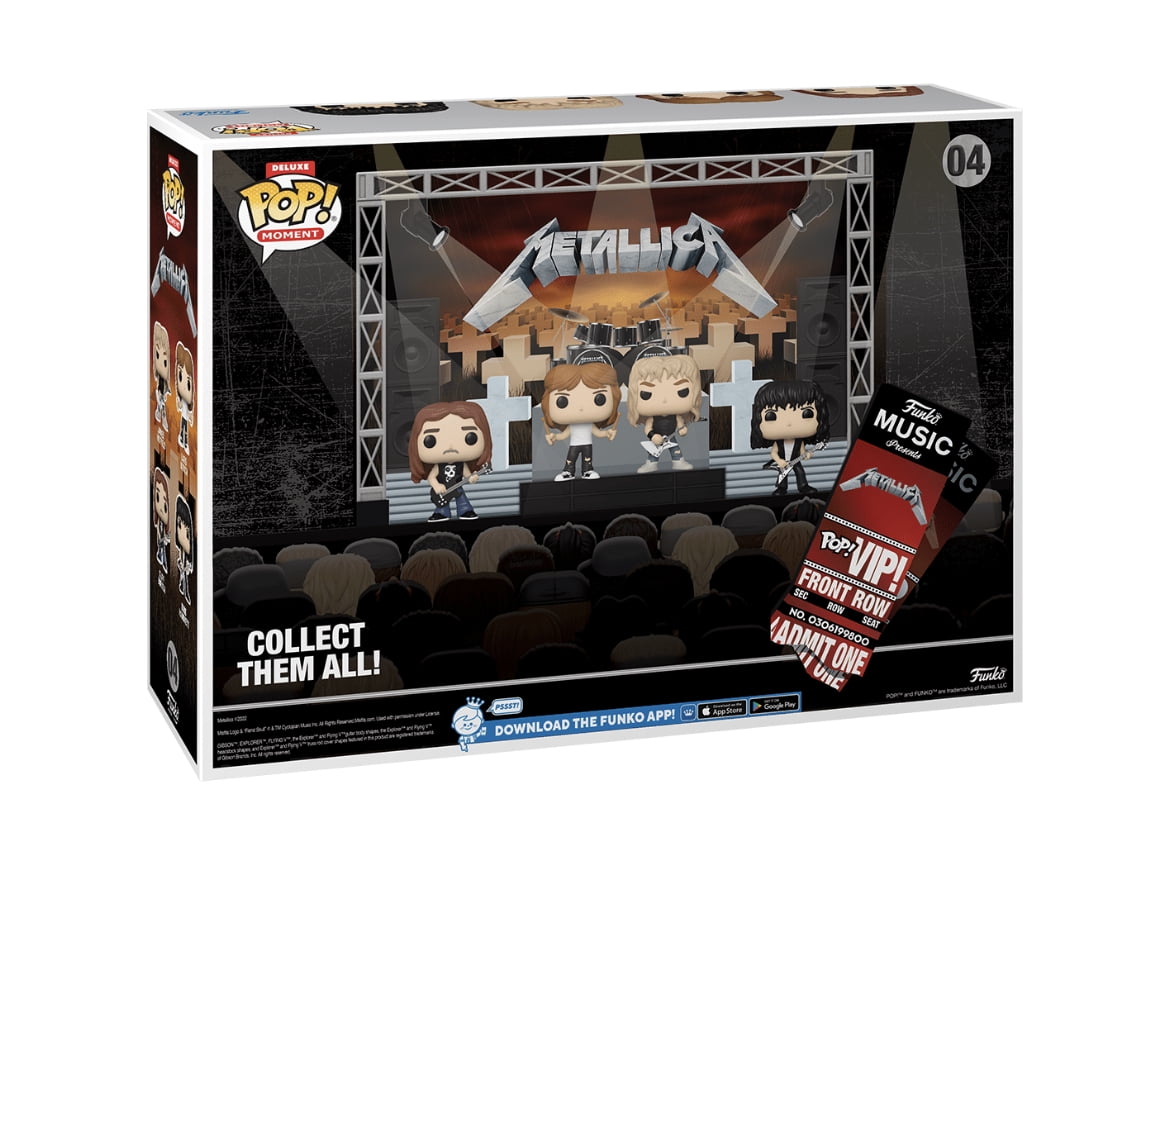 master of puppets tour 1986 funko